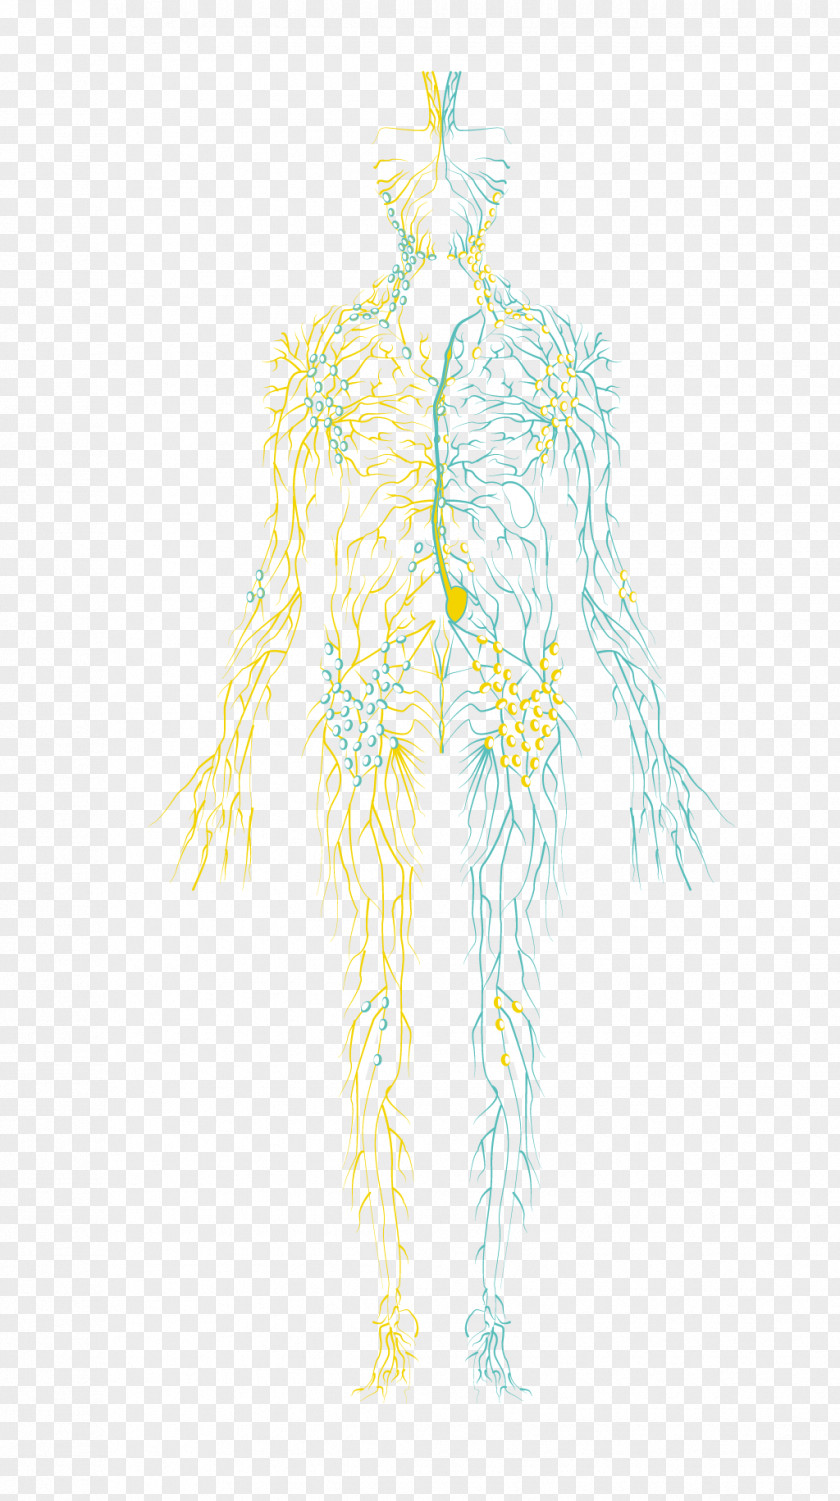 Anatomy Vector Drawing Illustration /m/02csf Character Pattern PNG